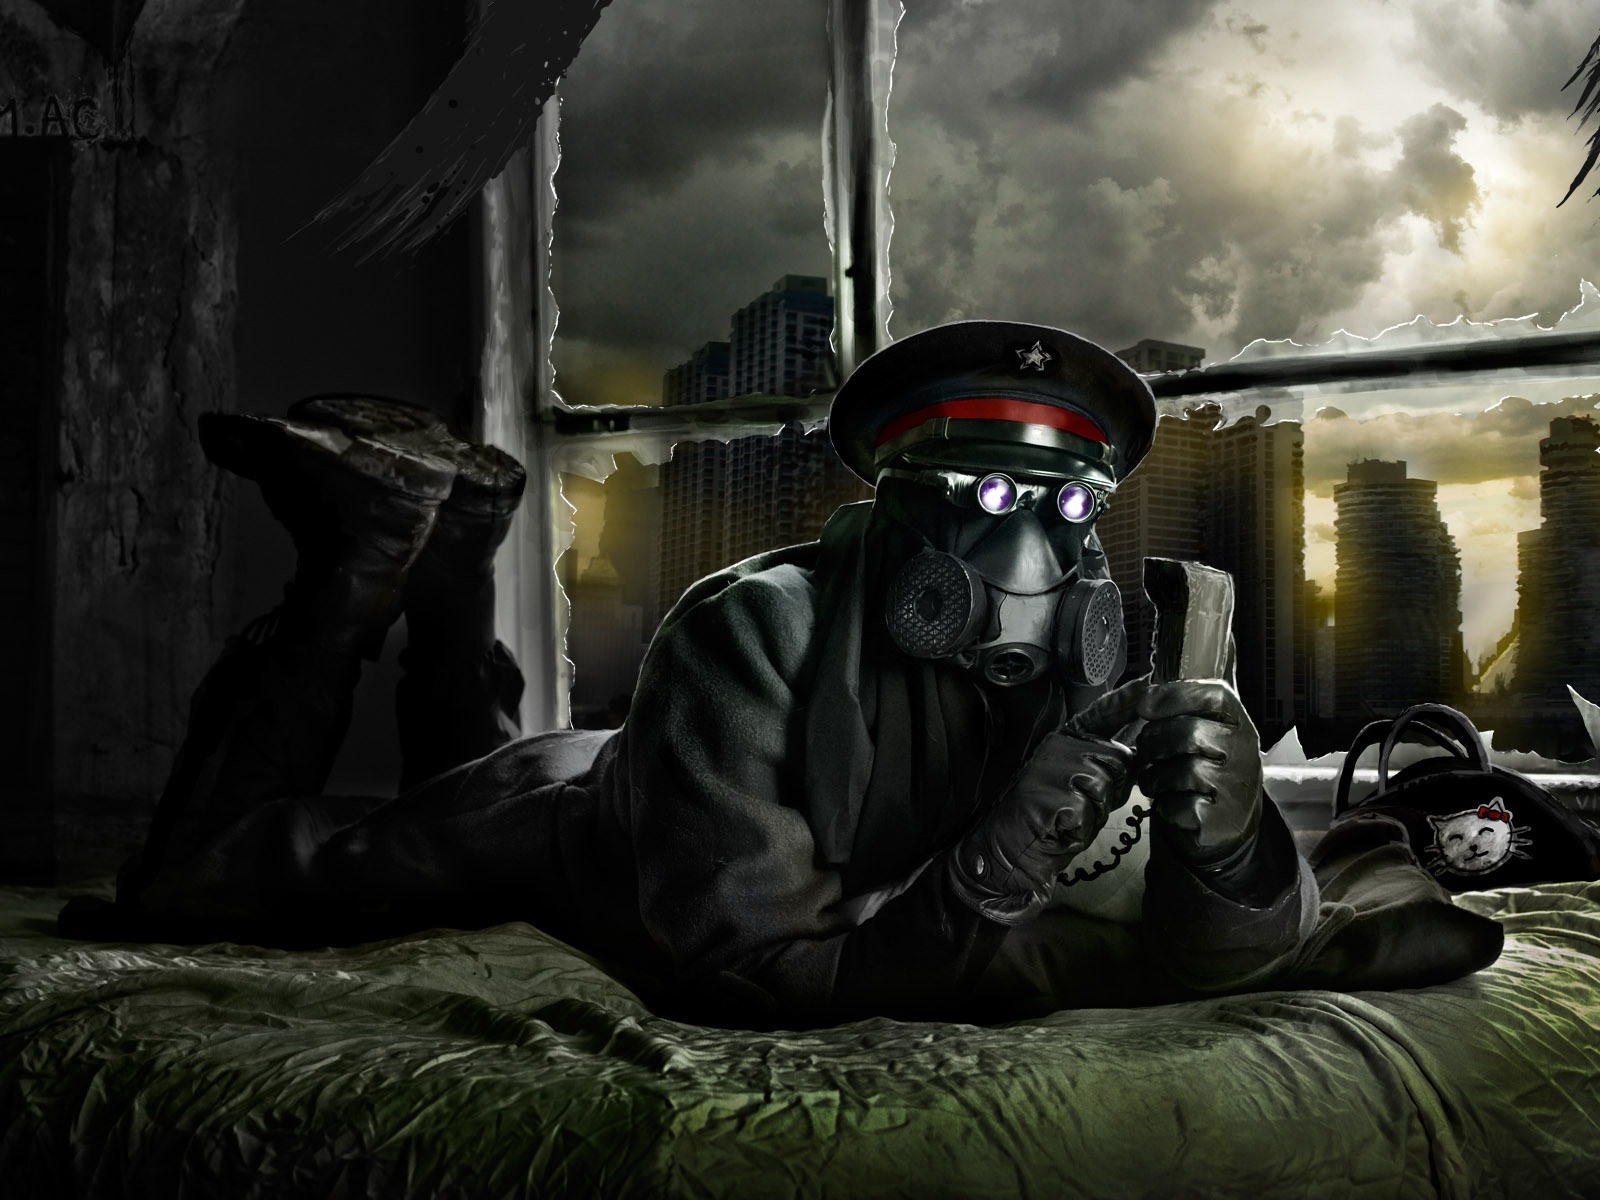 Romantically Apocalyptic creative painting wallpapers (2) #14 - 1600x1200